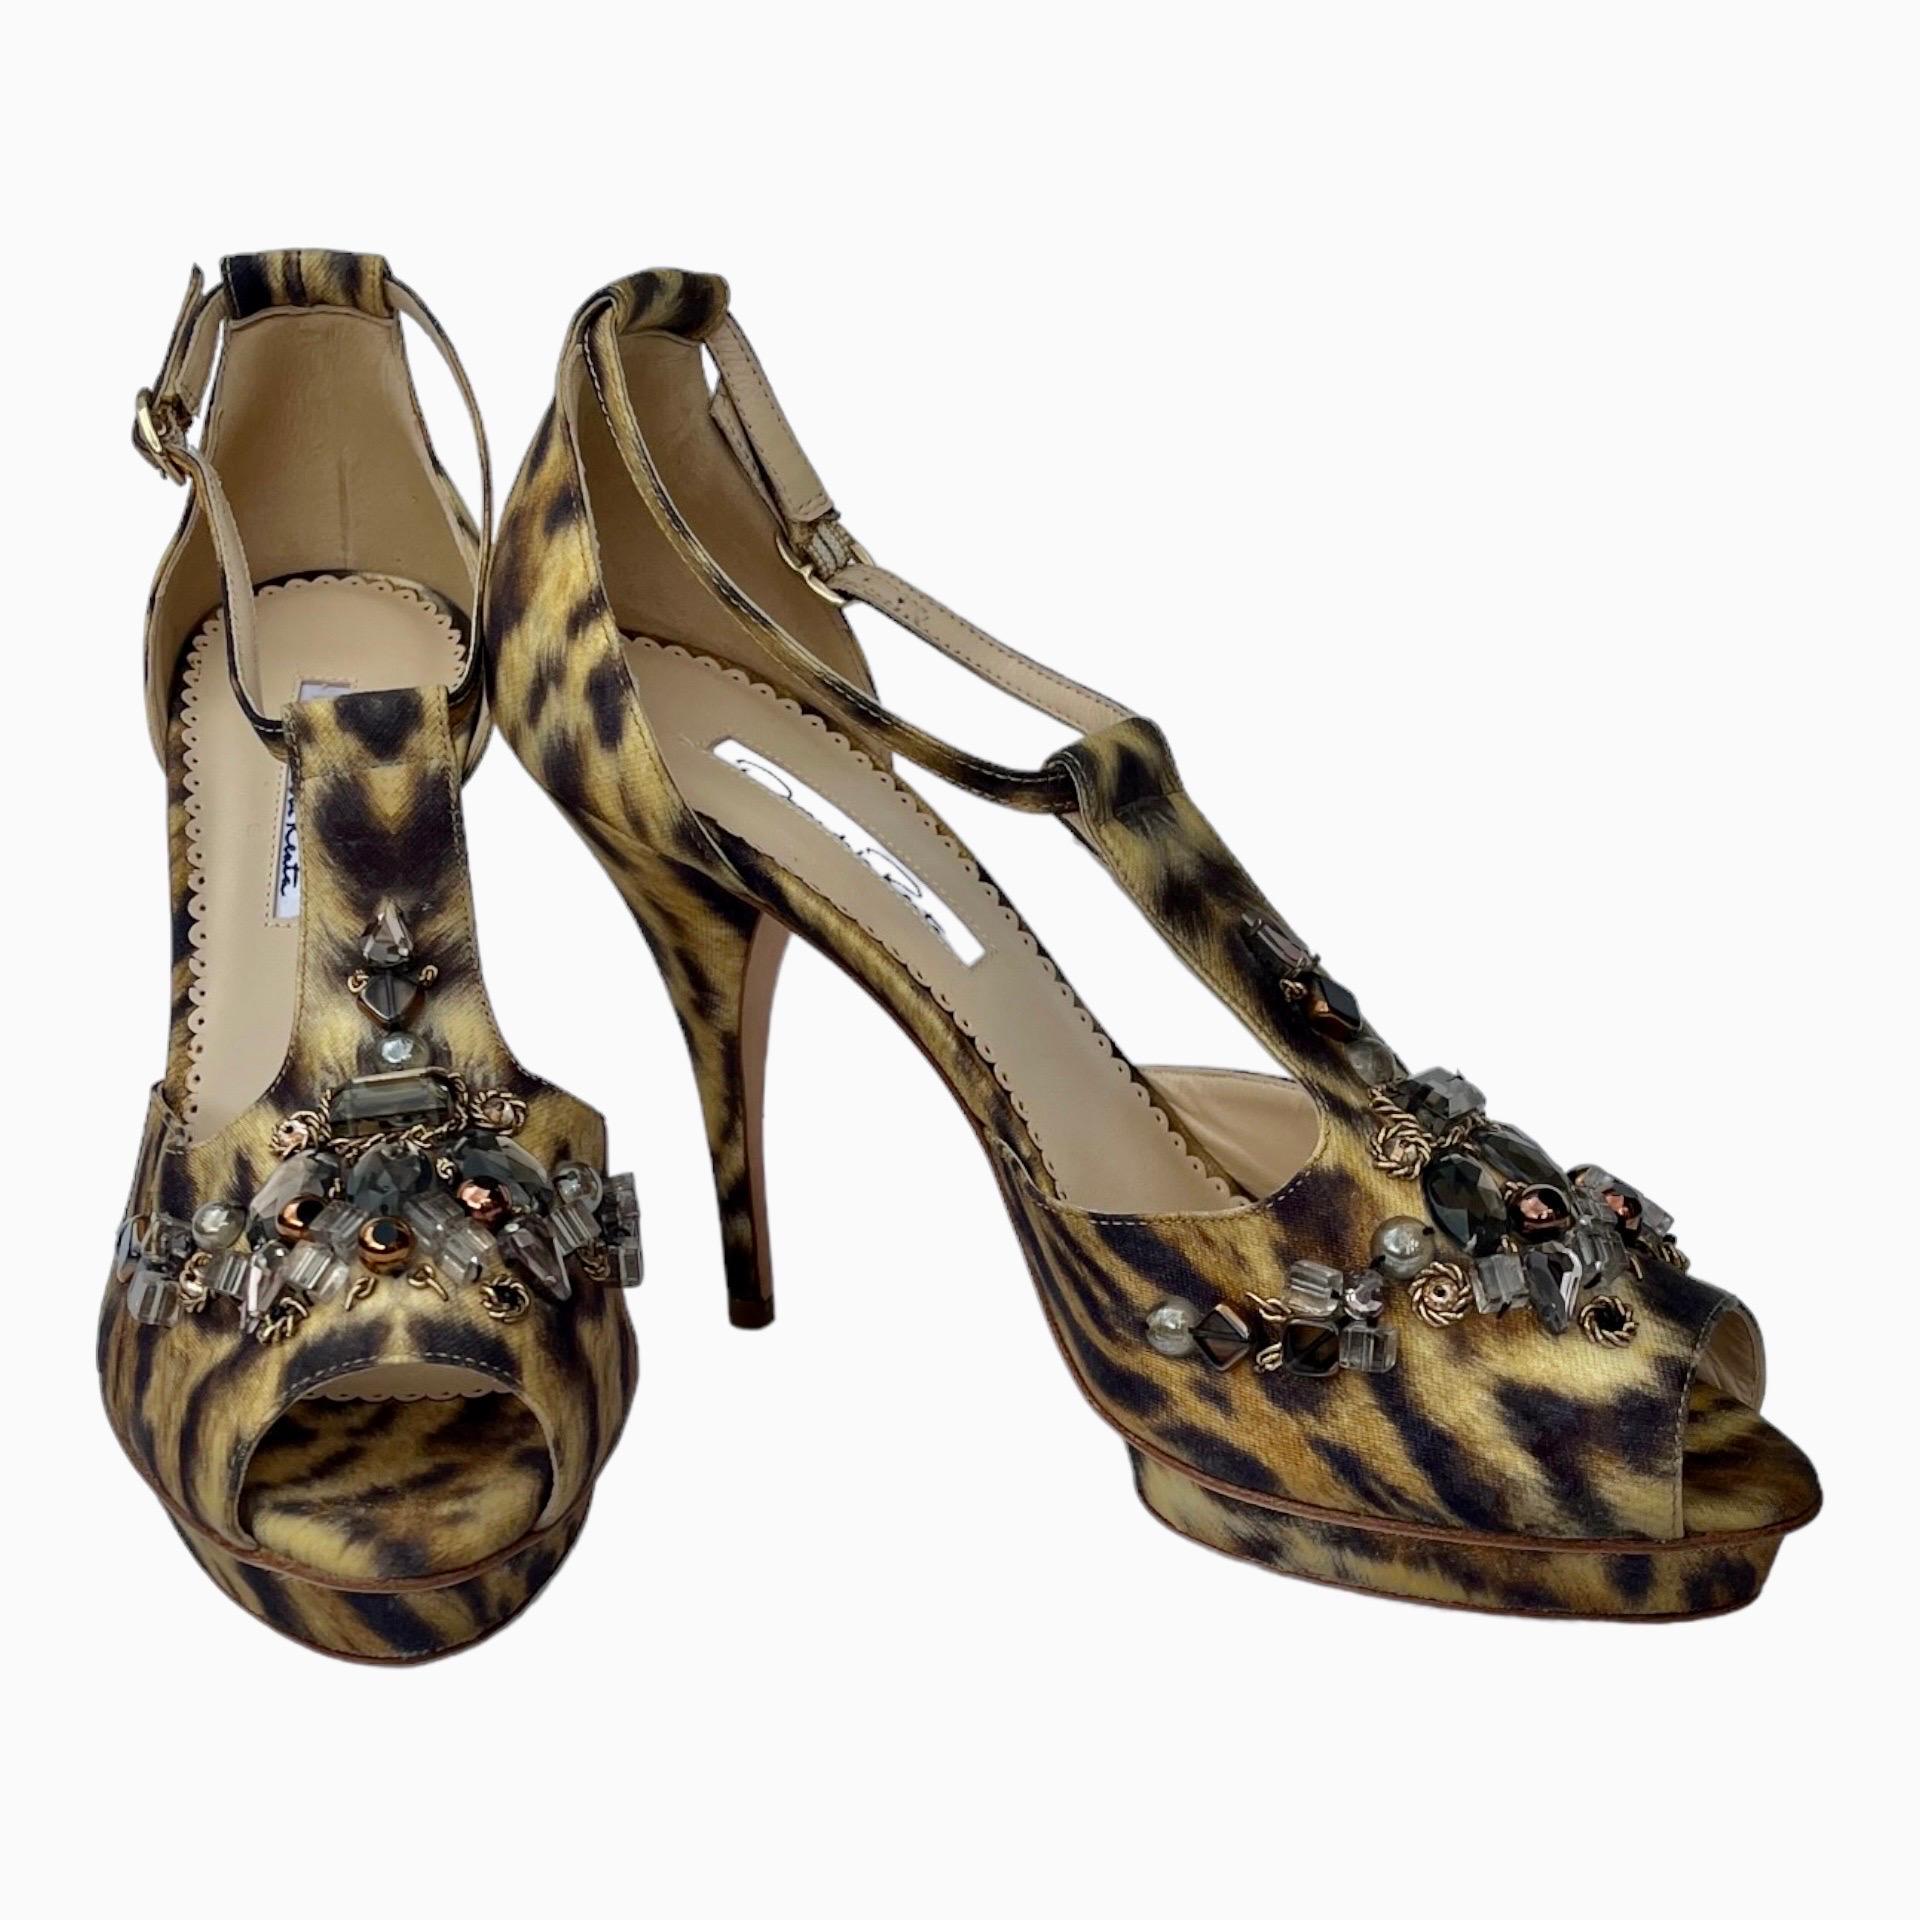 New OSCAR DE LA RENTA Crystal Embellished Lynx Printed Platform Sandals
Lynx print fabric
Crystal Embroidery
Platform
Smooth leather lining
Leather sole
Made in Italy
Sizes:  40 and 39.5
Brand new, in a box